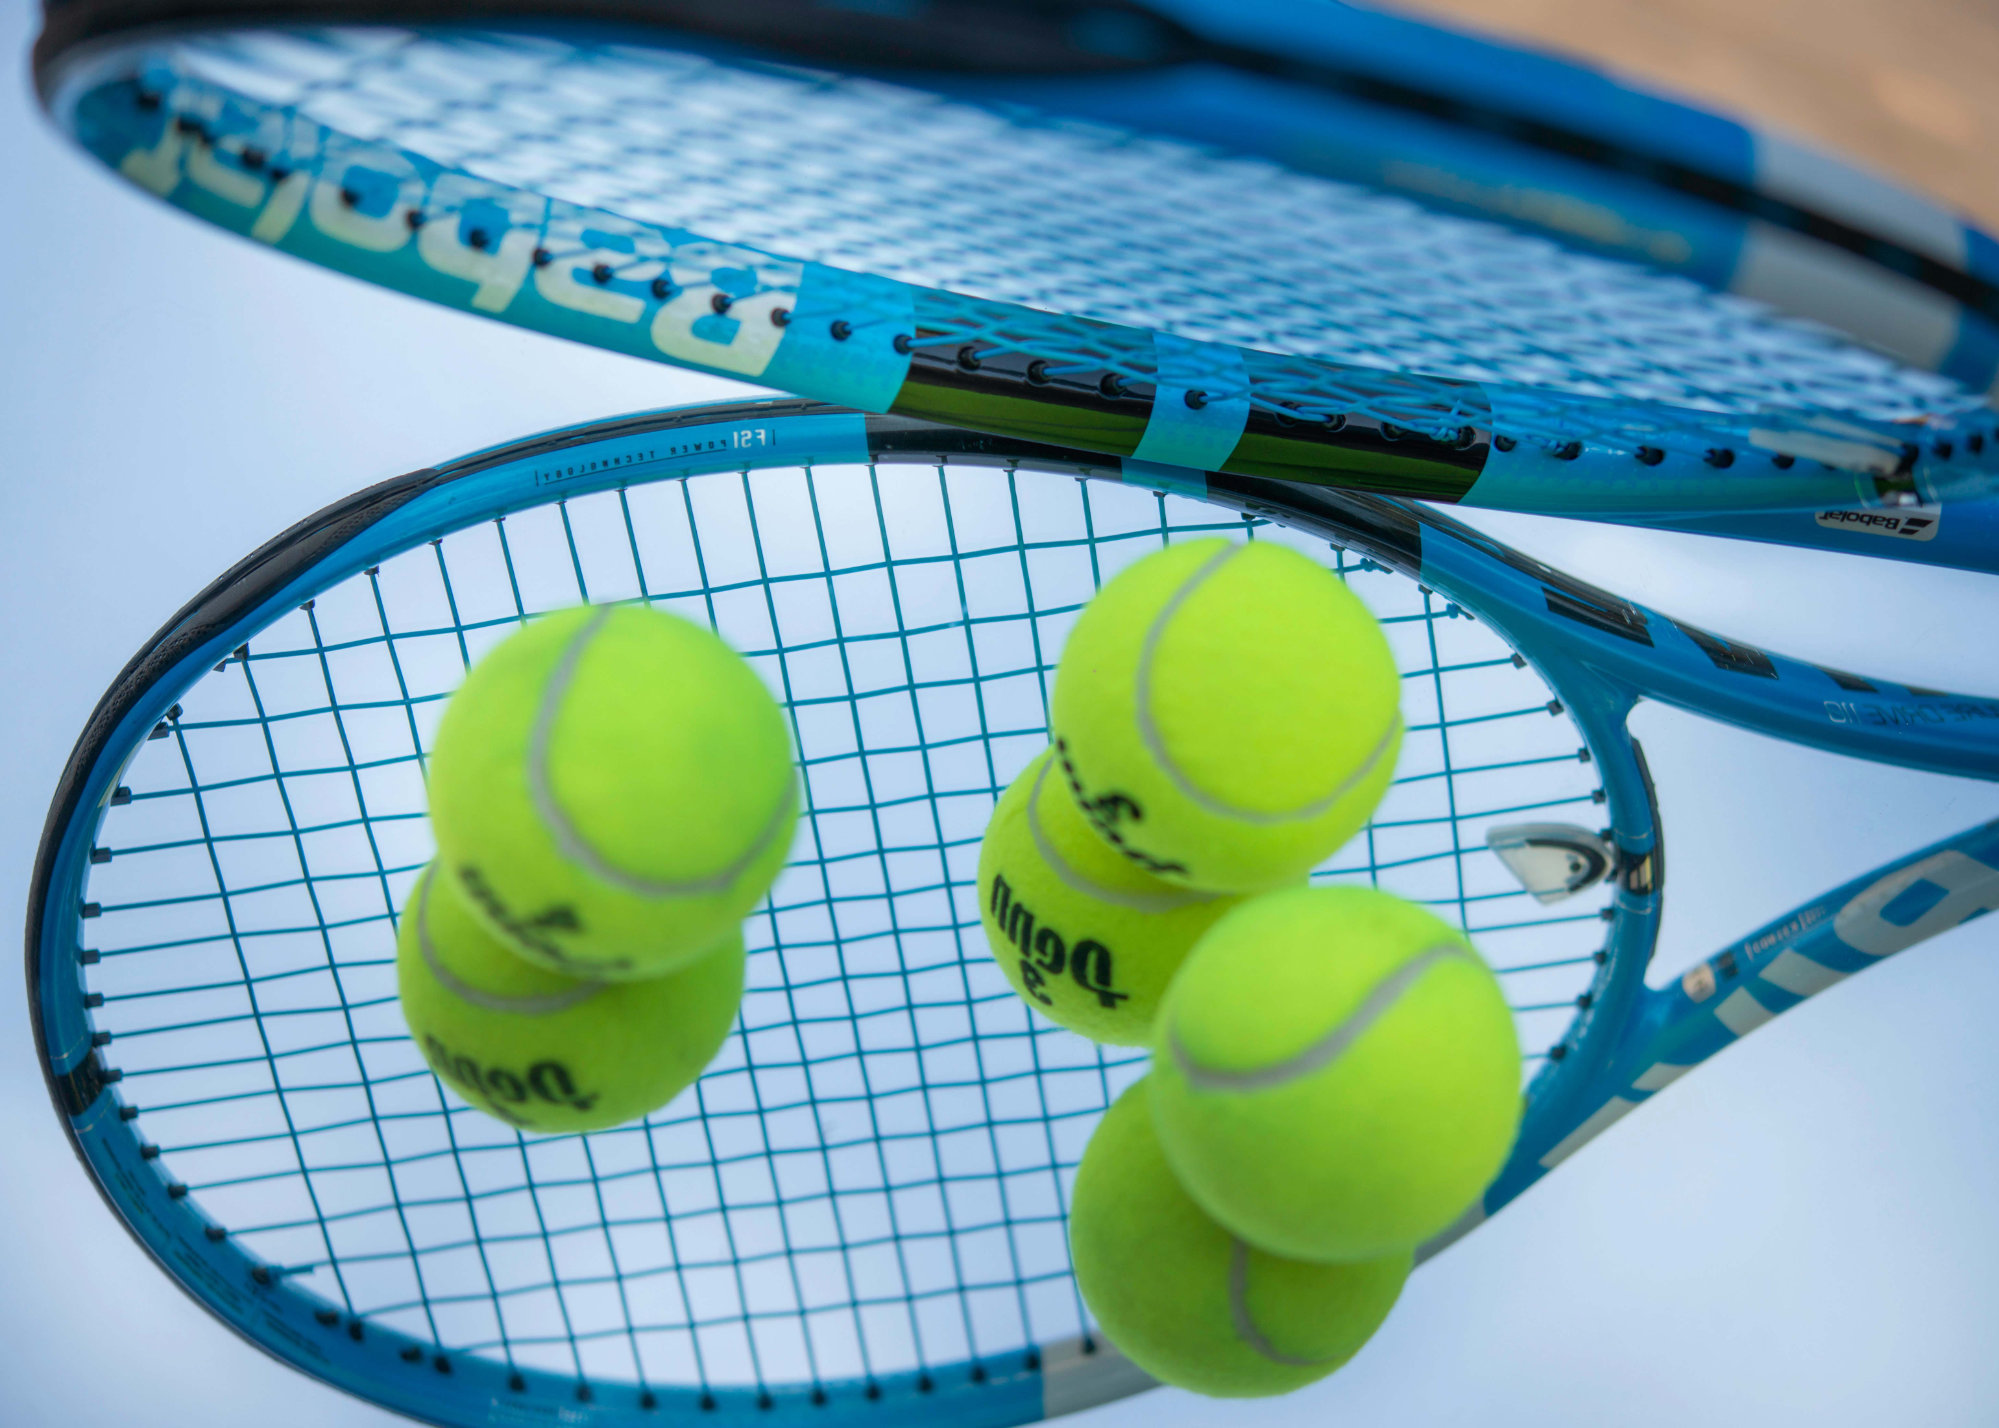 Image of some tennis rackets and tennis balls